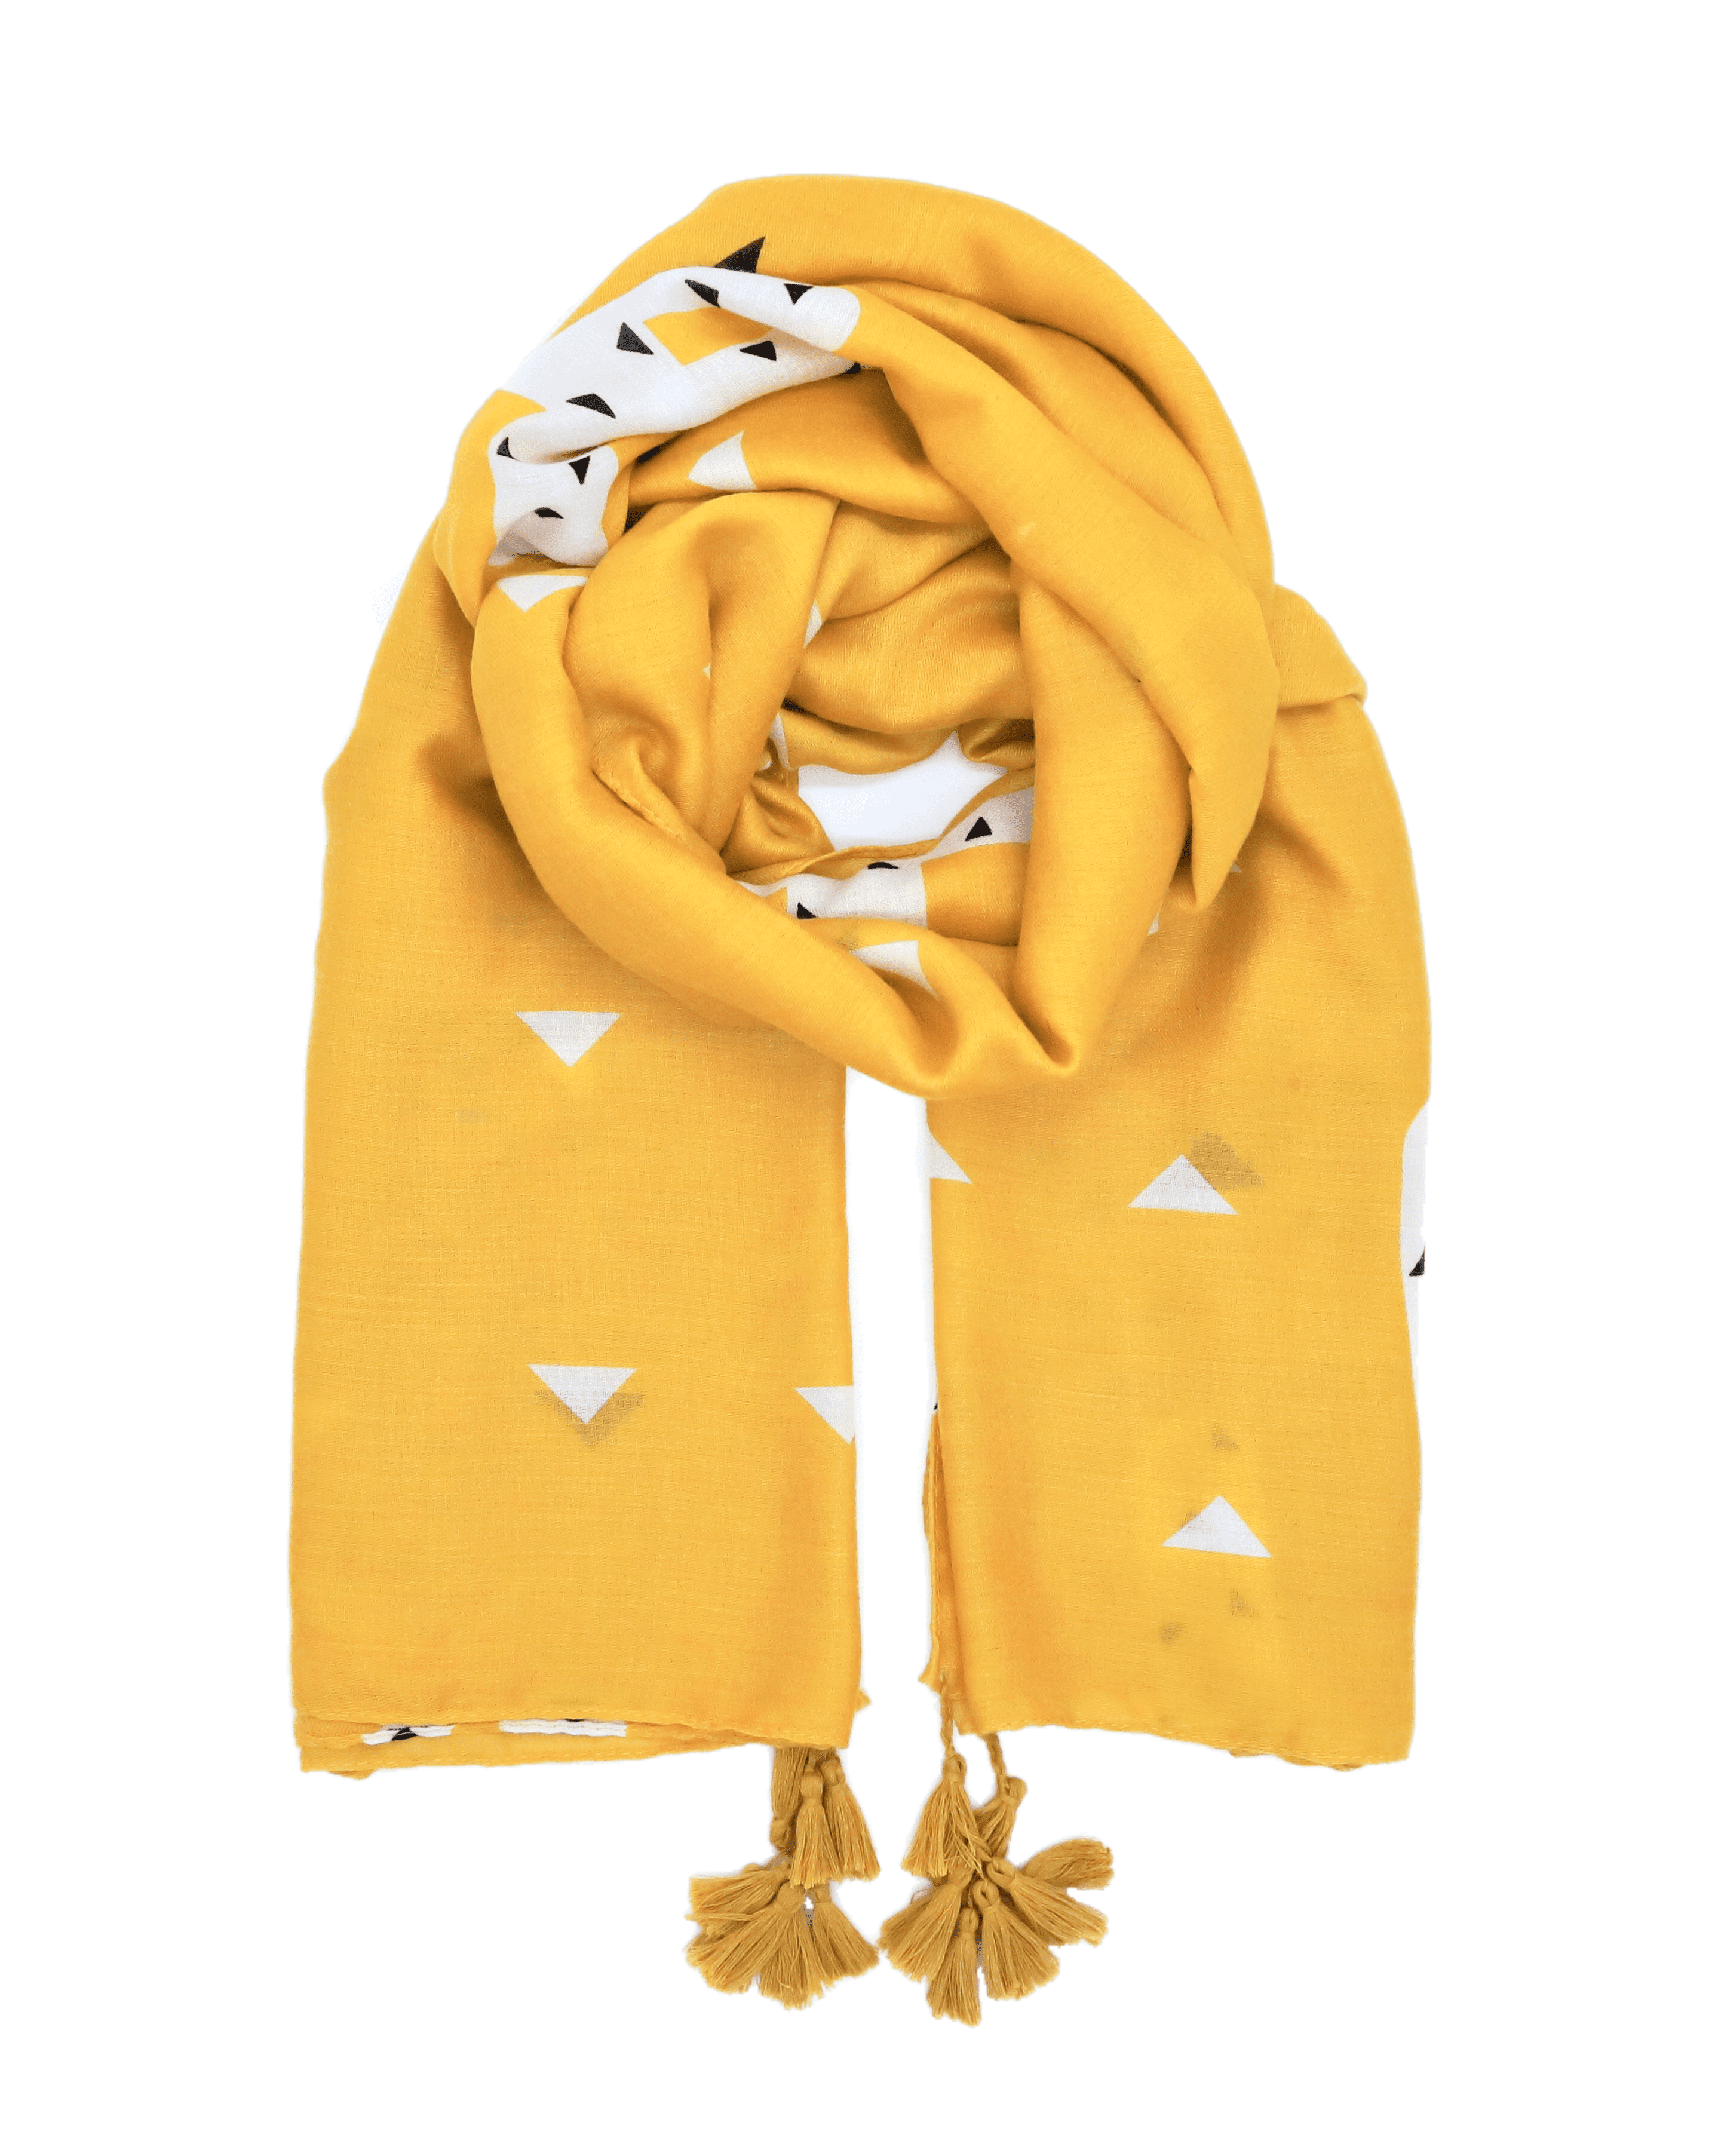 Yellow scarf. Scarf for women. Scarf with cactus pattern. Pareo. Wrap yourself up a great selection of fashion scarves for women and men at Scarf Designers online. FREE SHIPPING in all EUROPE. Discover new textures, cosy materials and modern prints. Make a pretty addition to your look with fashion scarves available in adaptable colours, a wide range of sizes and timeless styles. 